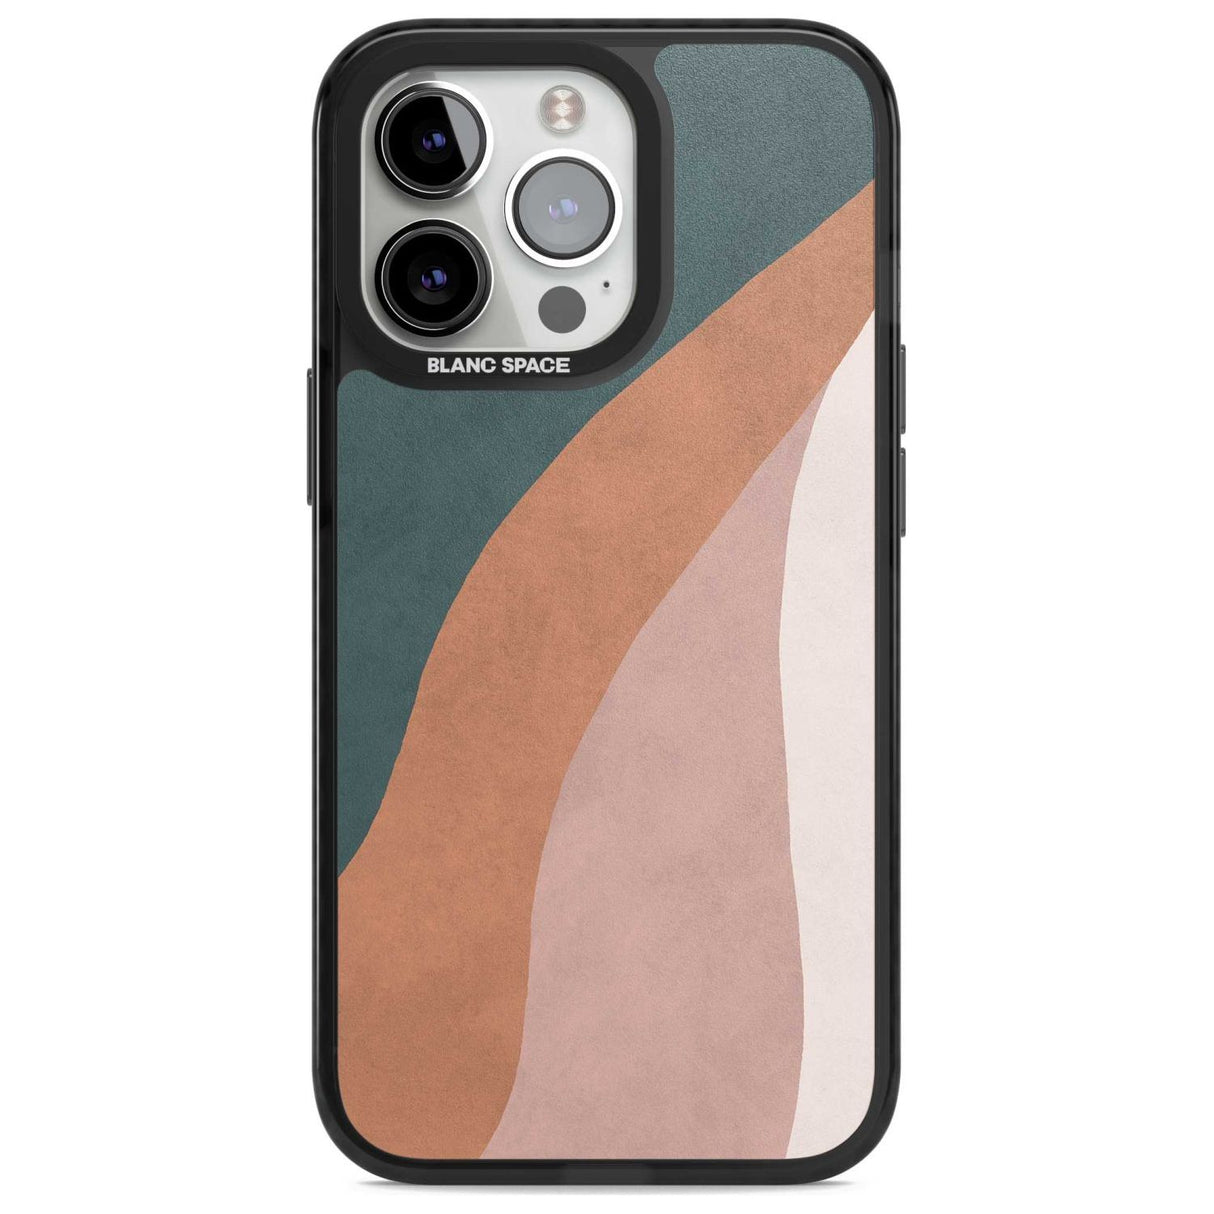 Lush Abstract Watercolour: Design #7 Phone Case iPhone 15 Pro Max / Magsafe Black Impact Case,iPhone 15 Pro / Magsafe Black Impact Case,iPhone 14 Pro Max / Magsafe Black Impact Case,iPhone 14 Pro / Magsafe Black Impact Case,iPhone 13 Pro / Magsafe Black Impact Case Blanc Space